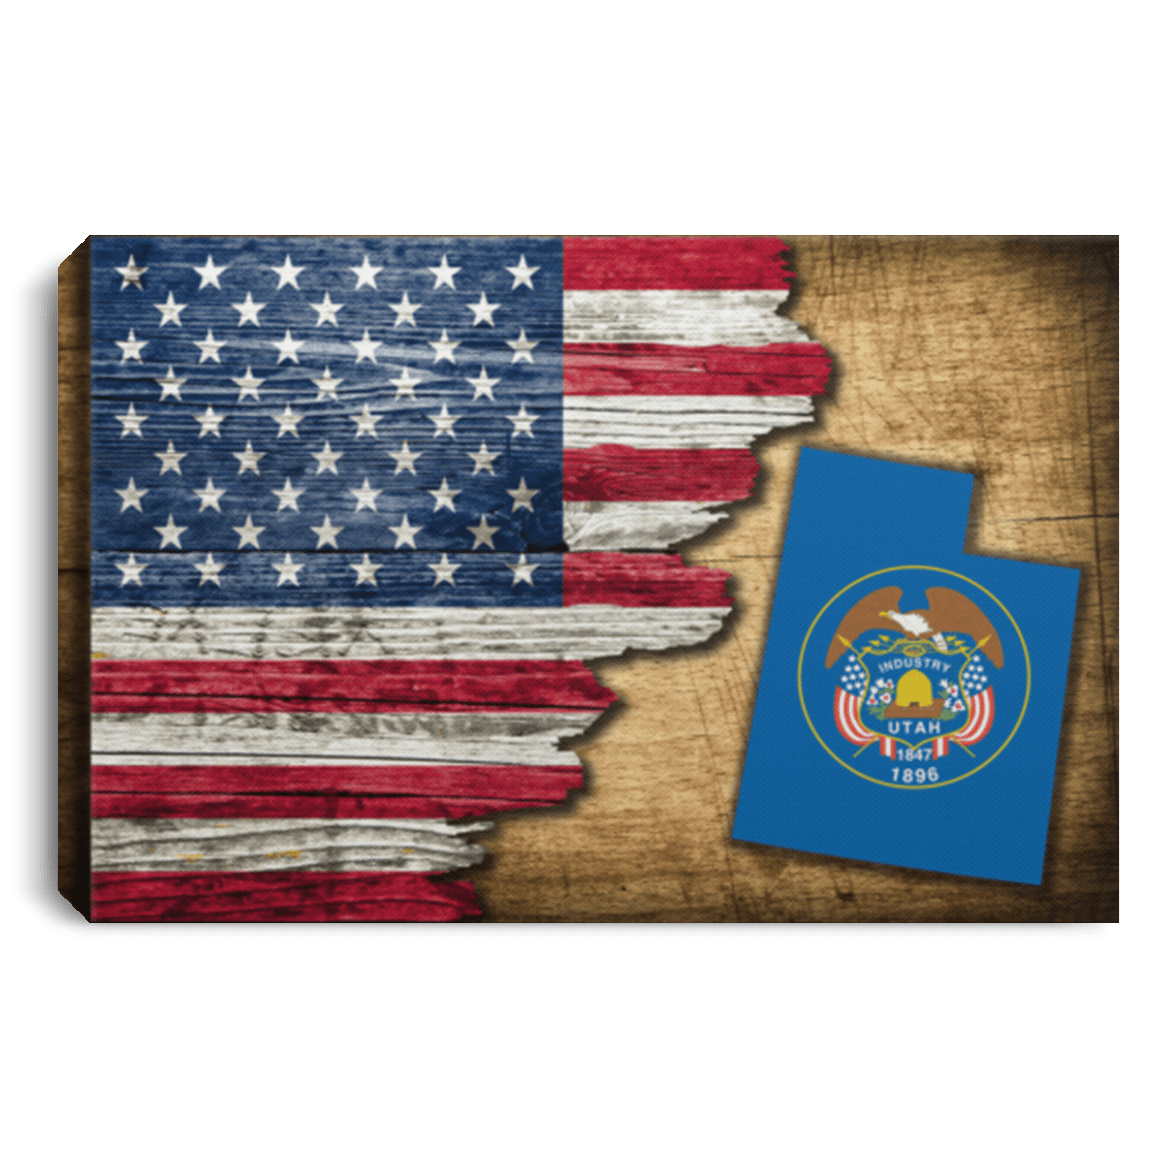 United States/Utah Flag Ripped Effect 12X8 Inches Landscape Canvas .75In Frame